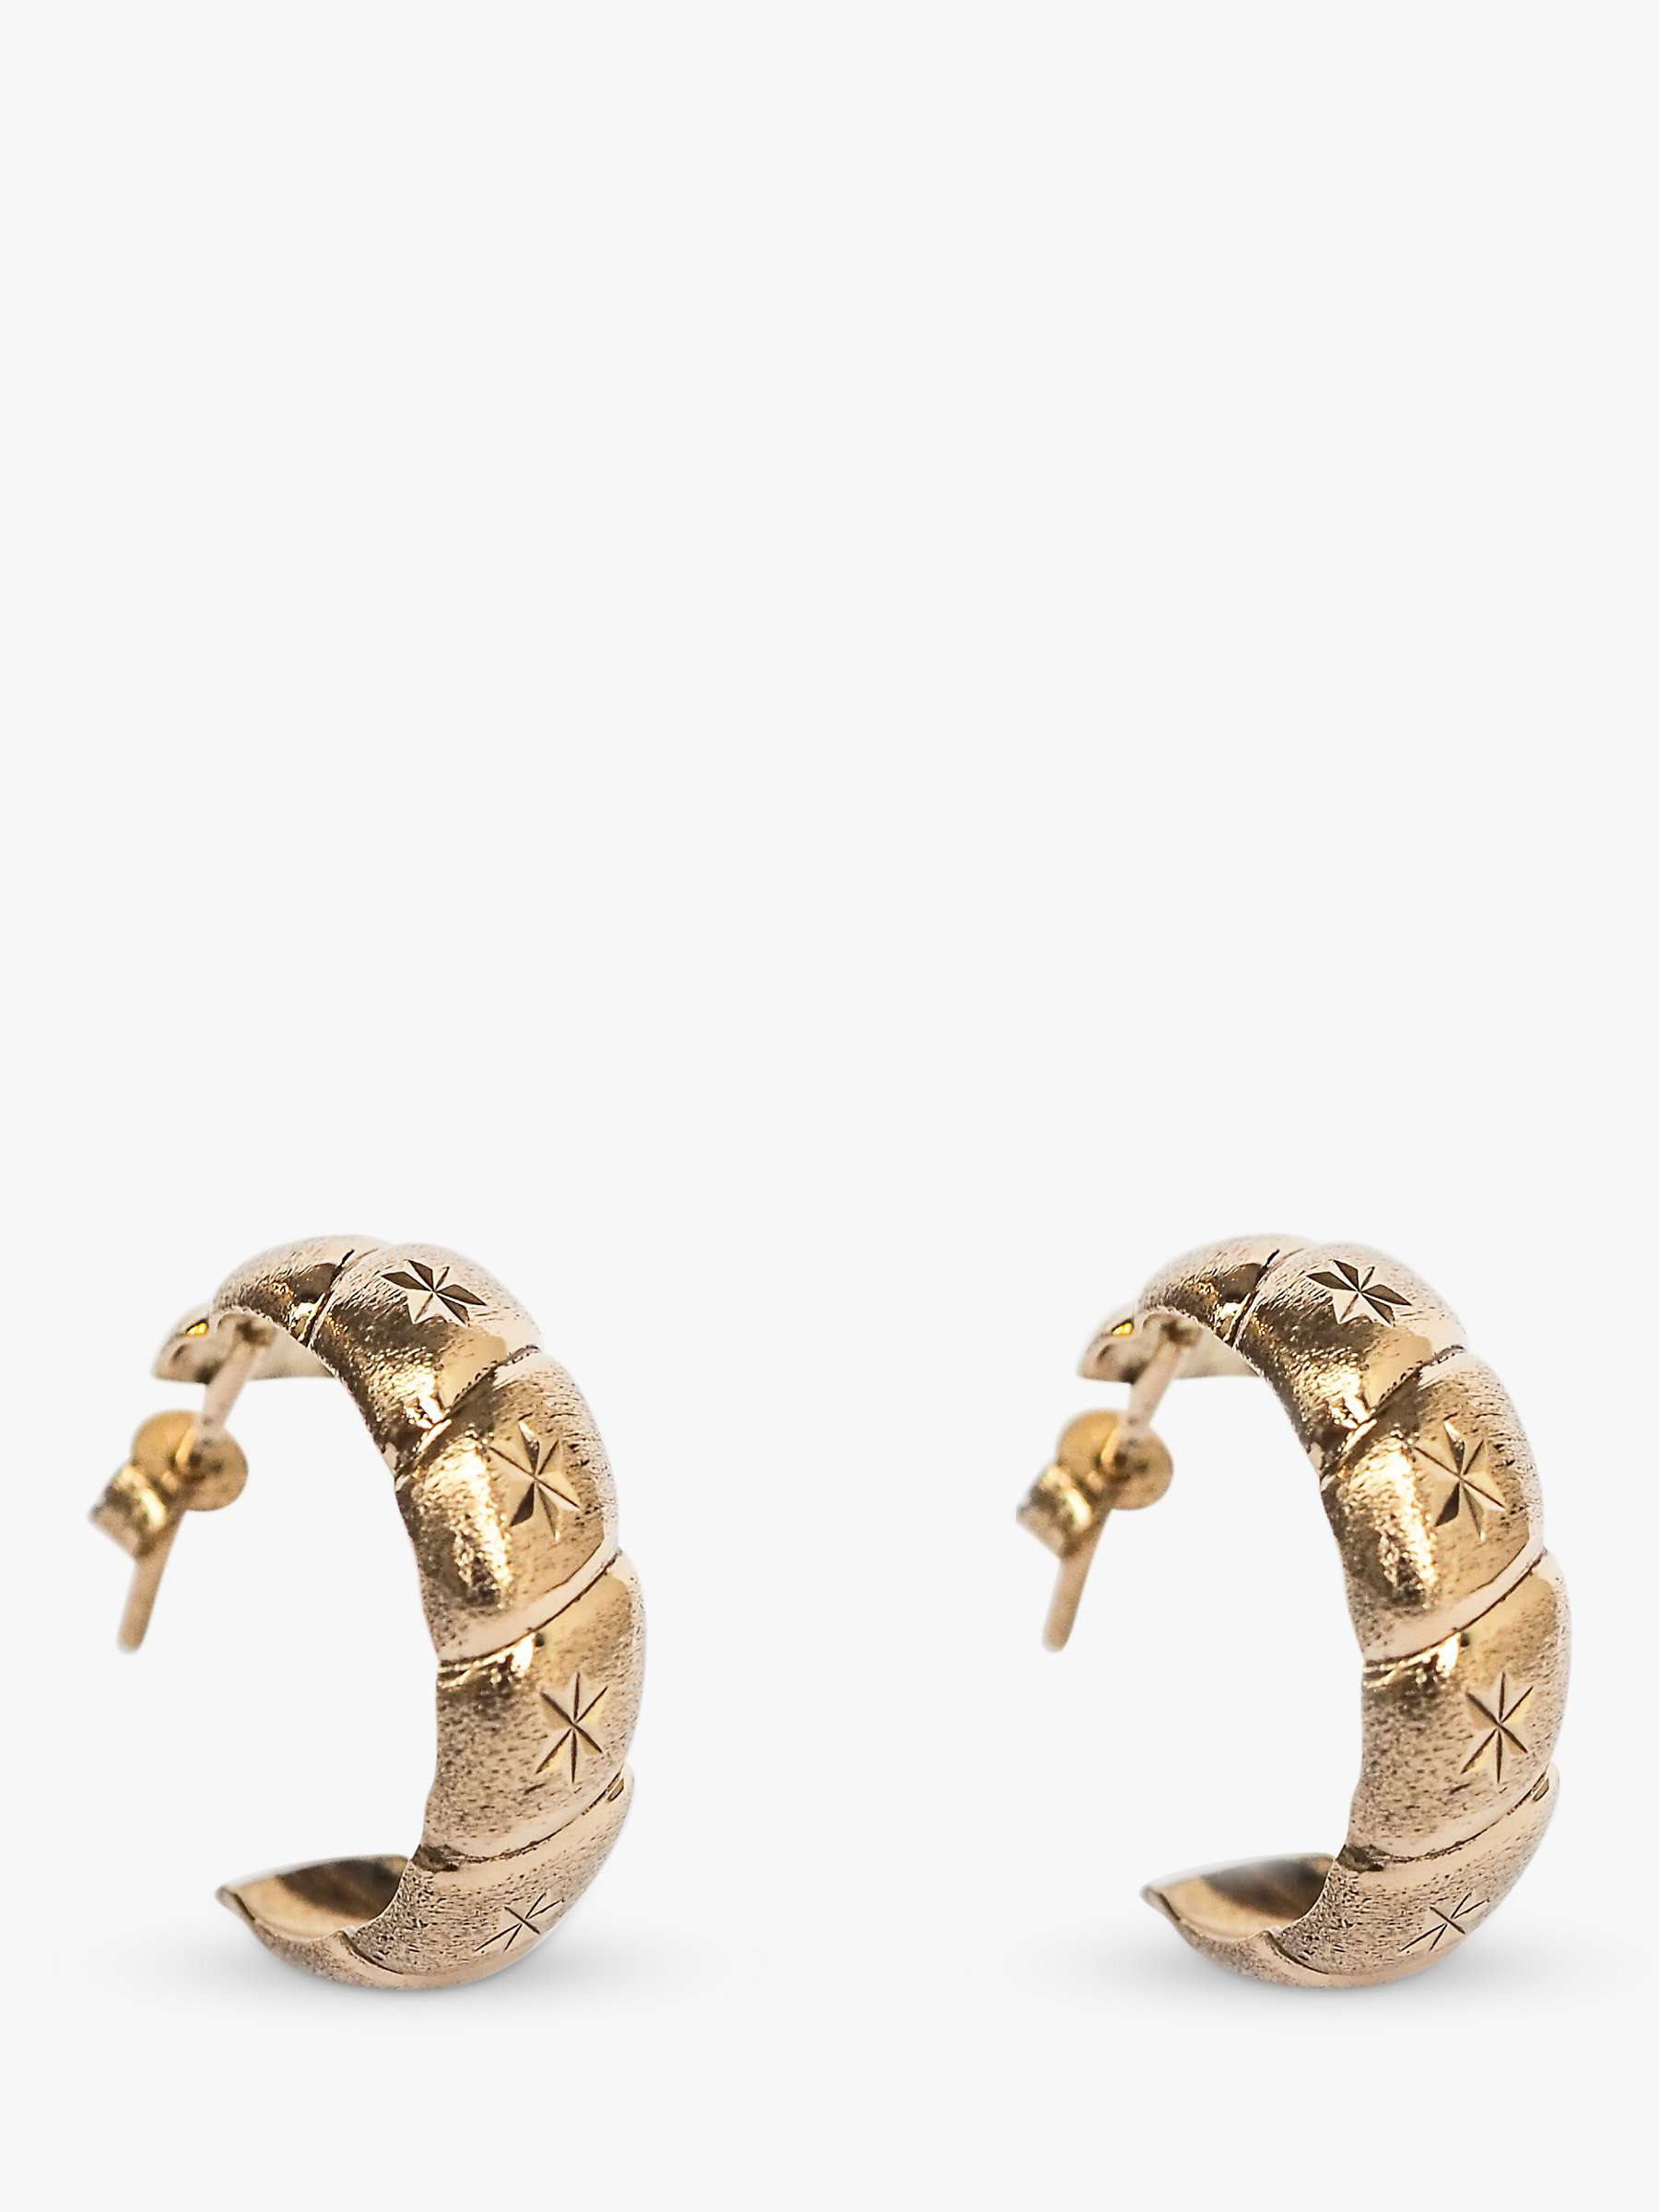 Buy L & T Heirlooms Second Hand 9ct Yellow Gold Star Engraved Demi Hoop Earrings, Gold Online at johnlewis.com